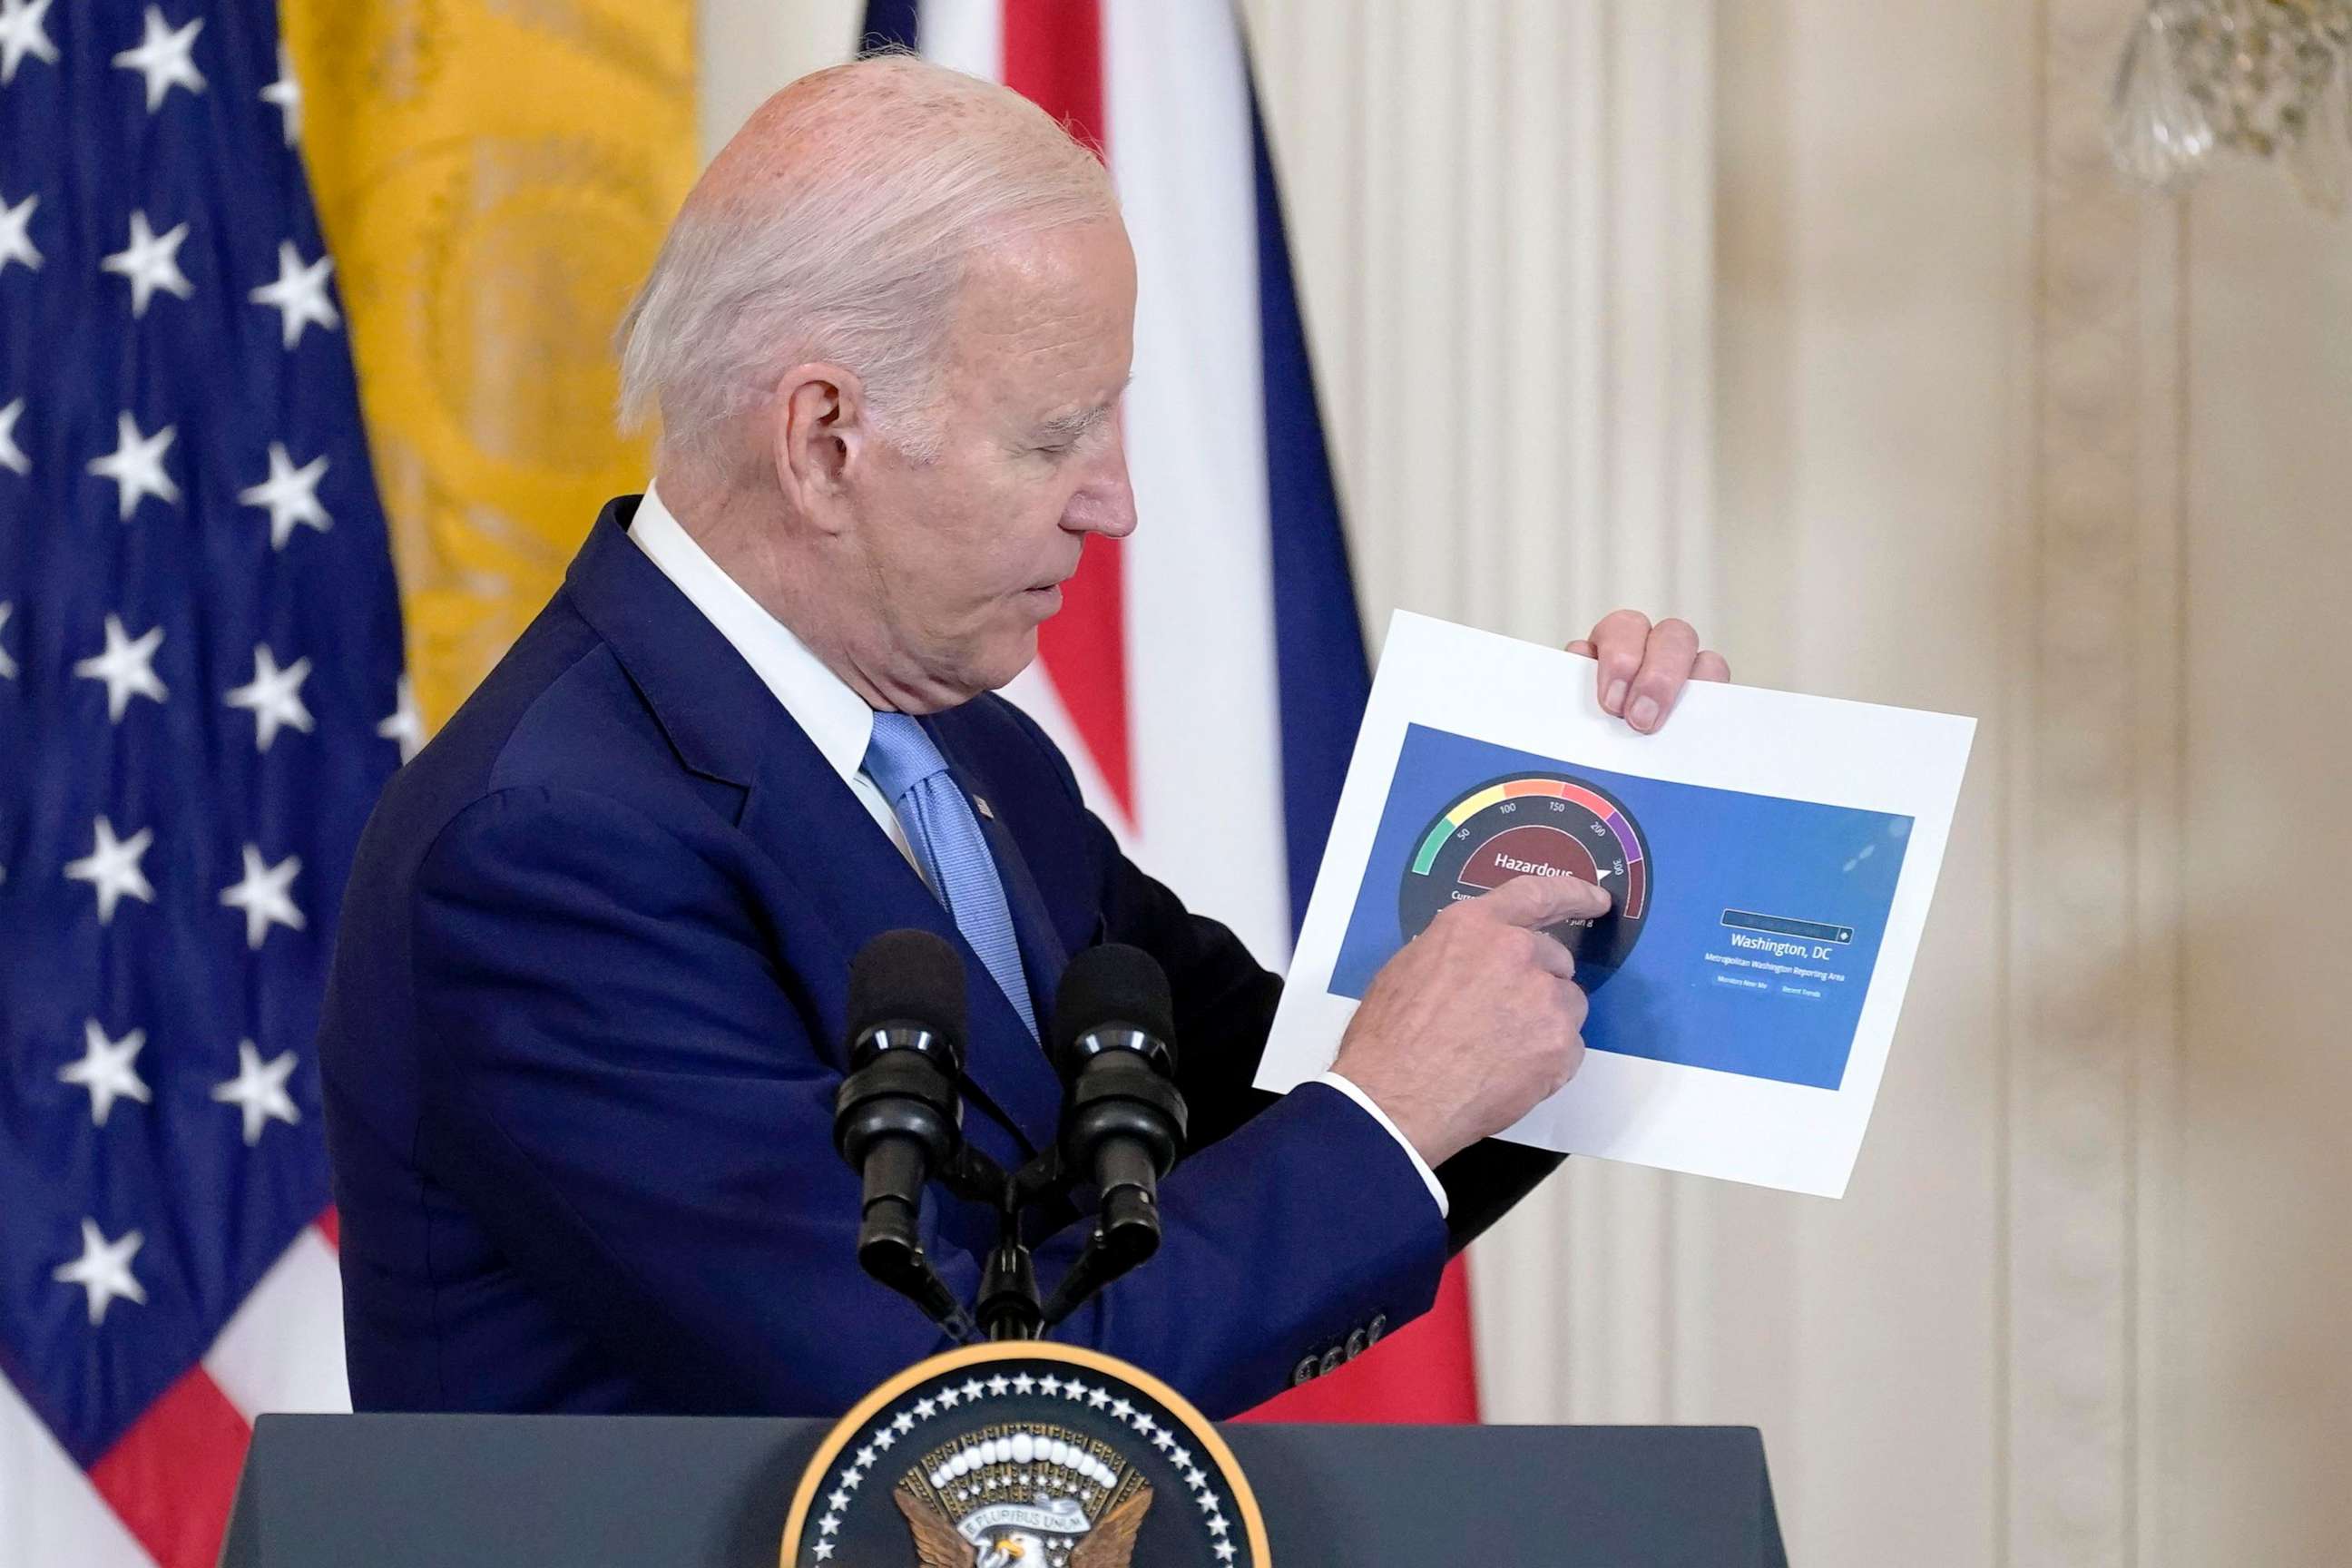 PHOTO: President Joe Biden holds a paper showing an air quality level for Washington as he speaks about Canada's wildfires during a news conference in the East Room of the White House in Washington, D.C., on June 8, 2023.